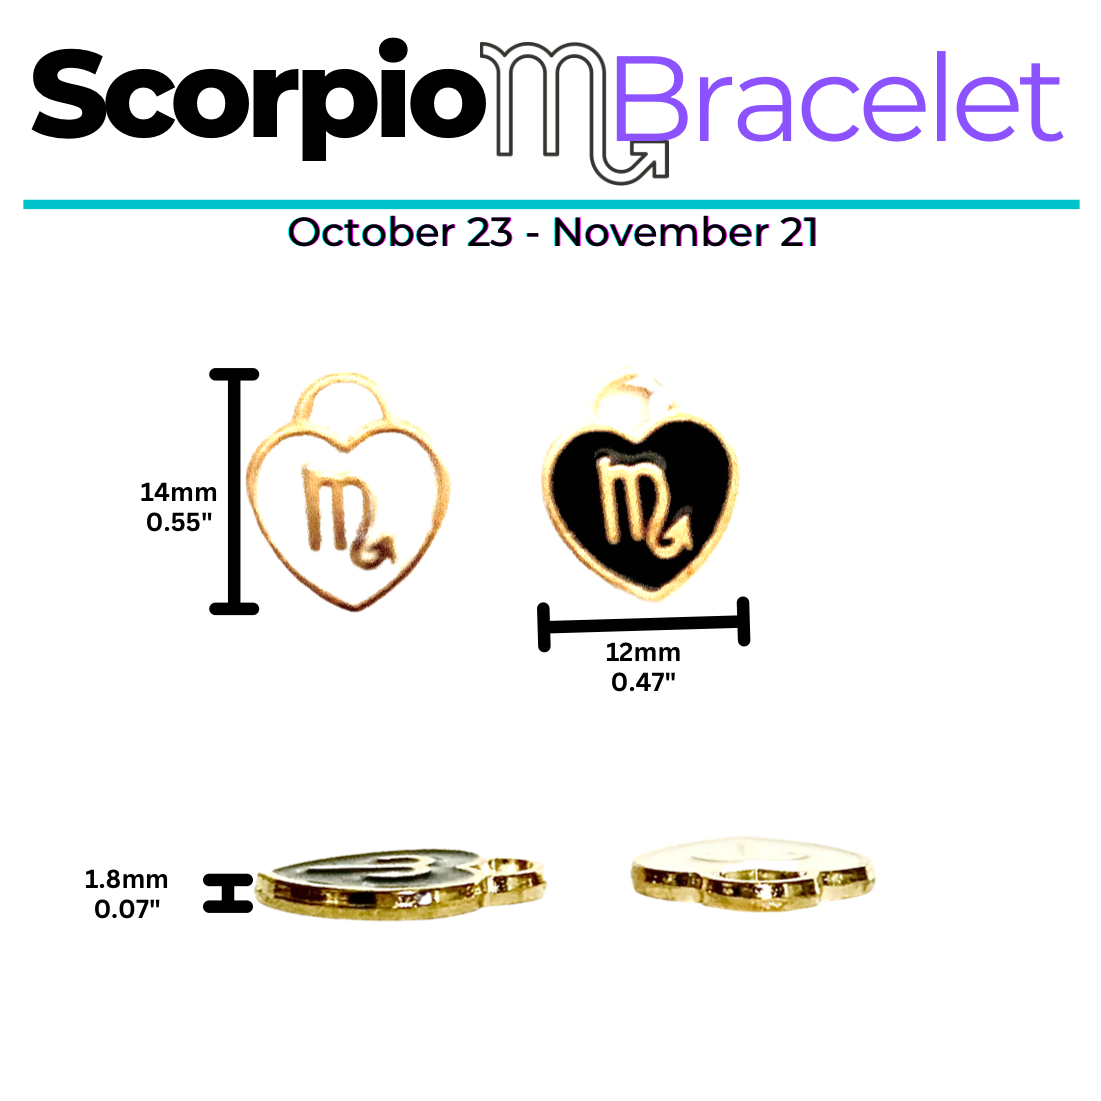 Accessorize Your Style: Scorpio Charm Bracelet with Natural Crystals.